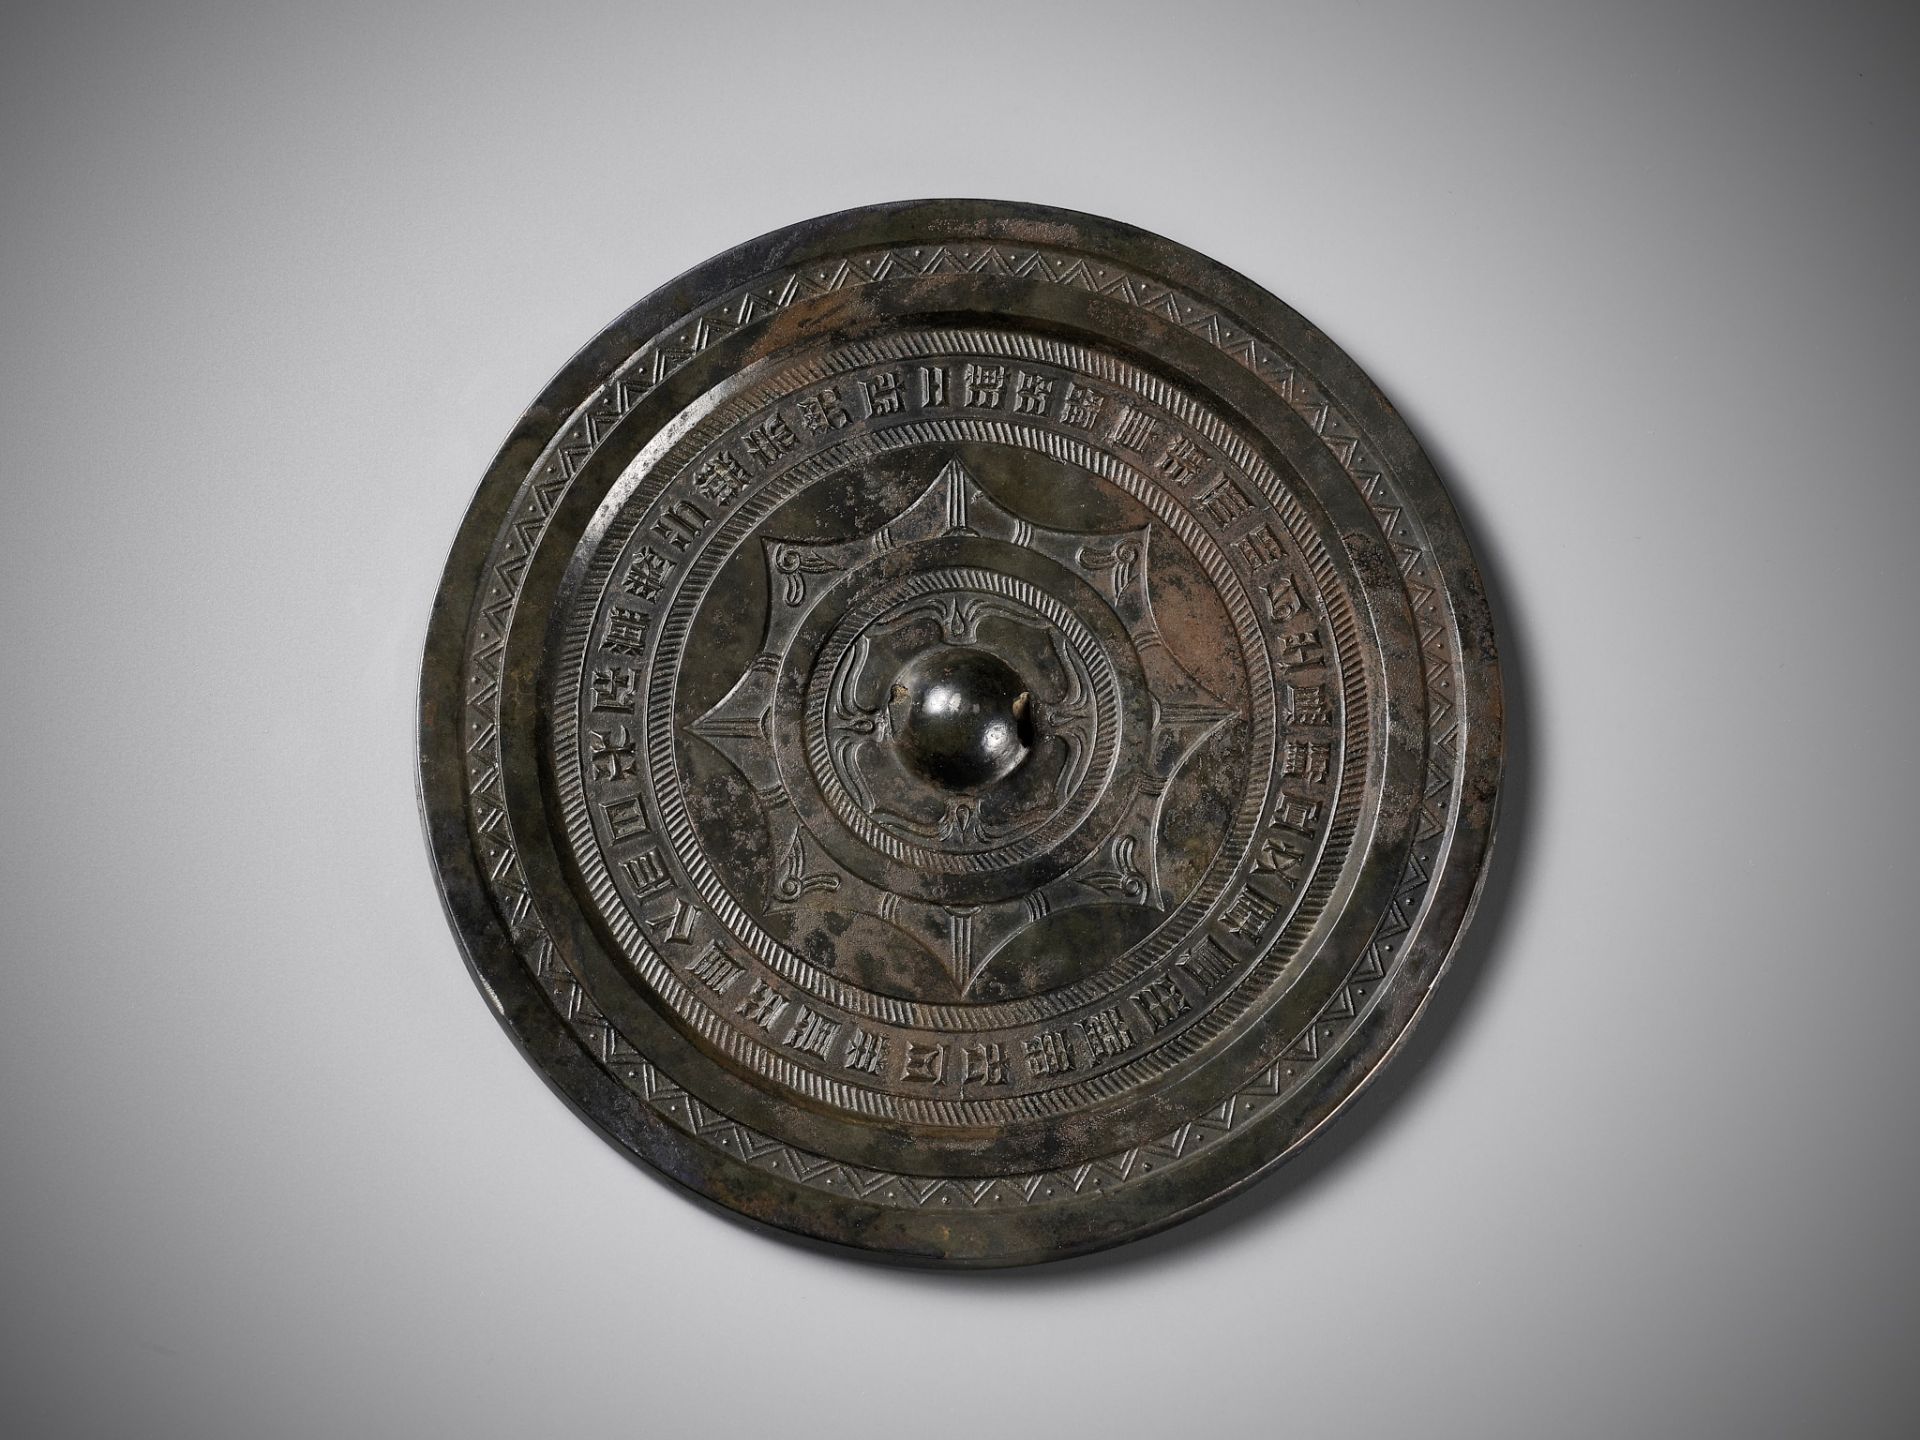 A LARGE BRONZE MIRROR WITH A 37-CHARACTER INSCRIPTION, HAN DYNASTY, CHINA, 206 BC-220 AD - Image 7 of 16